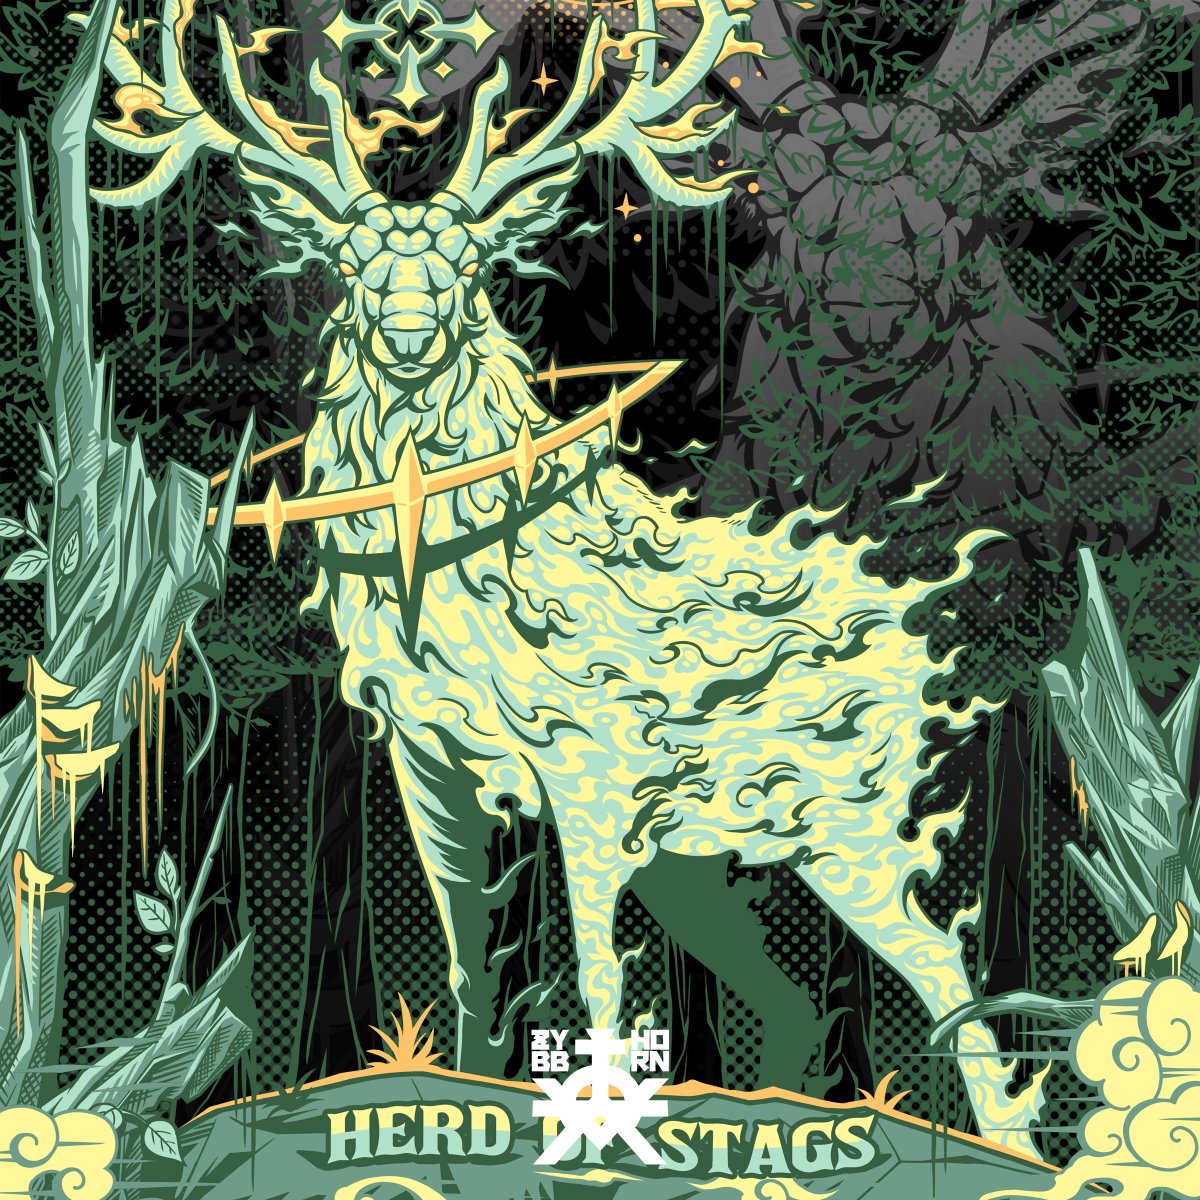 HERO OF STAGS

old commission art 

#stags #heroofstags #jerusalemcluster #clothingdesigner #clothingdesign #apparel #appareldesign #tshirtdesign #tshirtdesigner